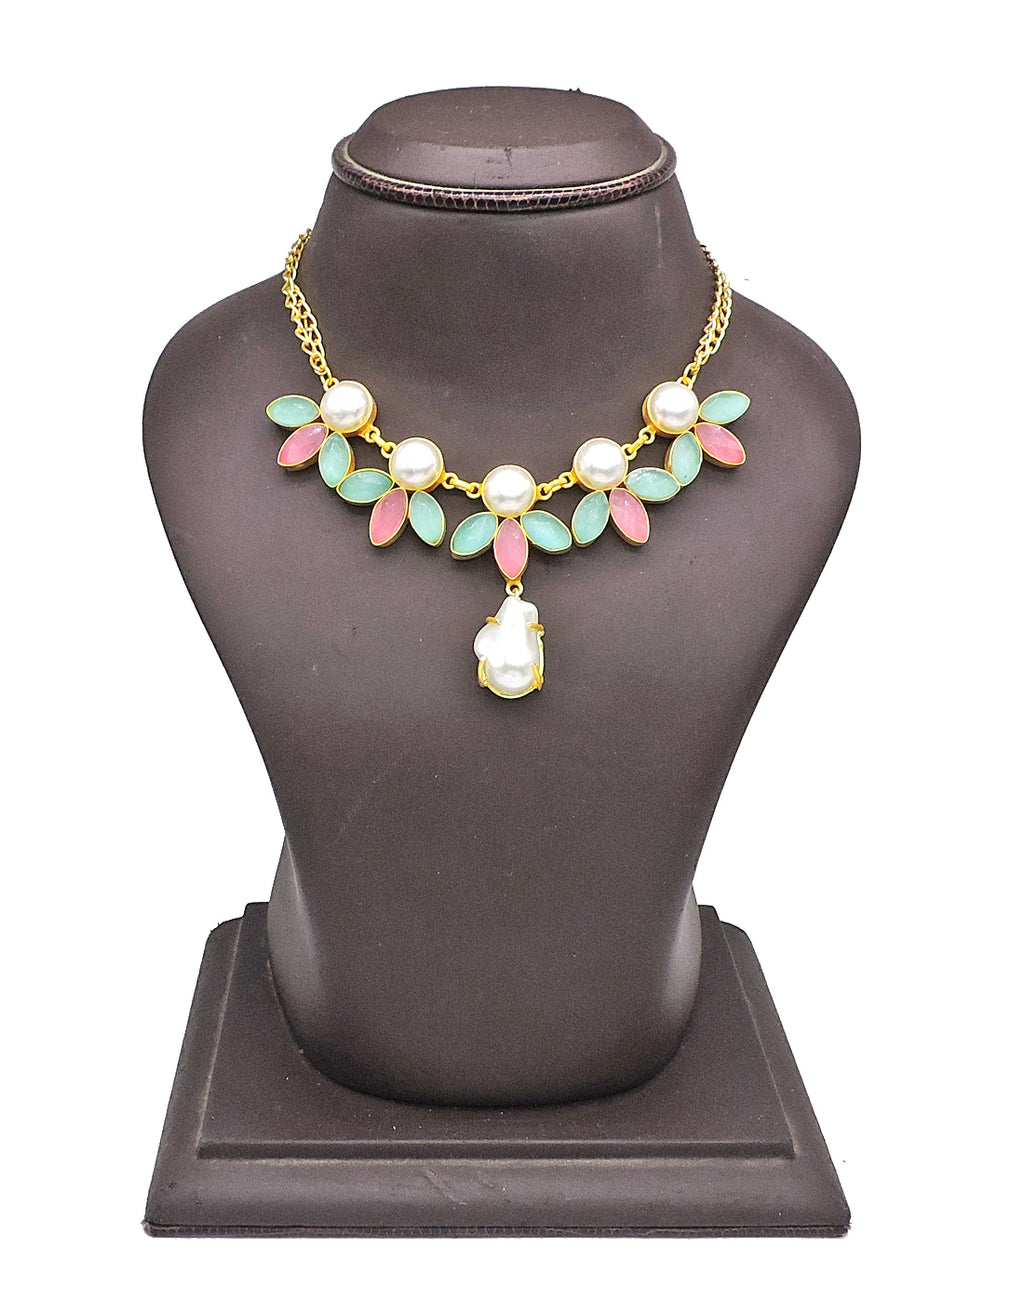 Butterfly Pearl Necklace - Statement Necklaces - Gold-Plated & Hypoallergenic Jewellery - Made in India - Dubai Jewellery - Dori